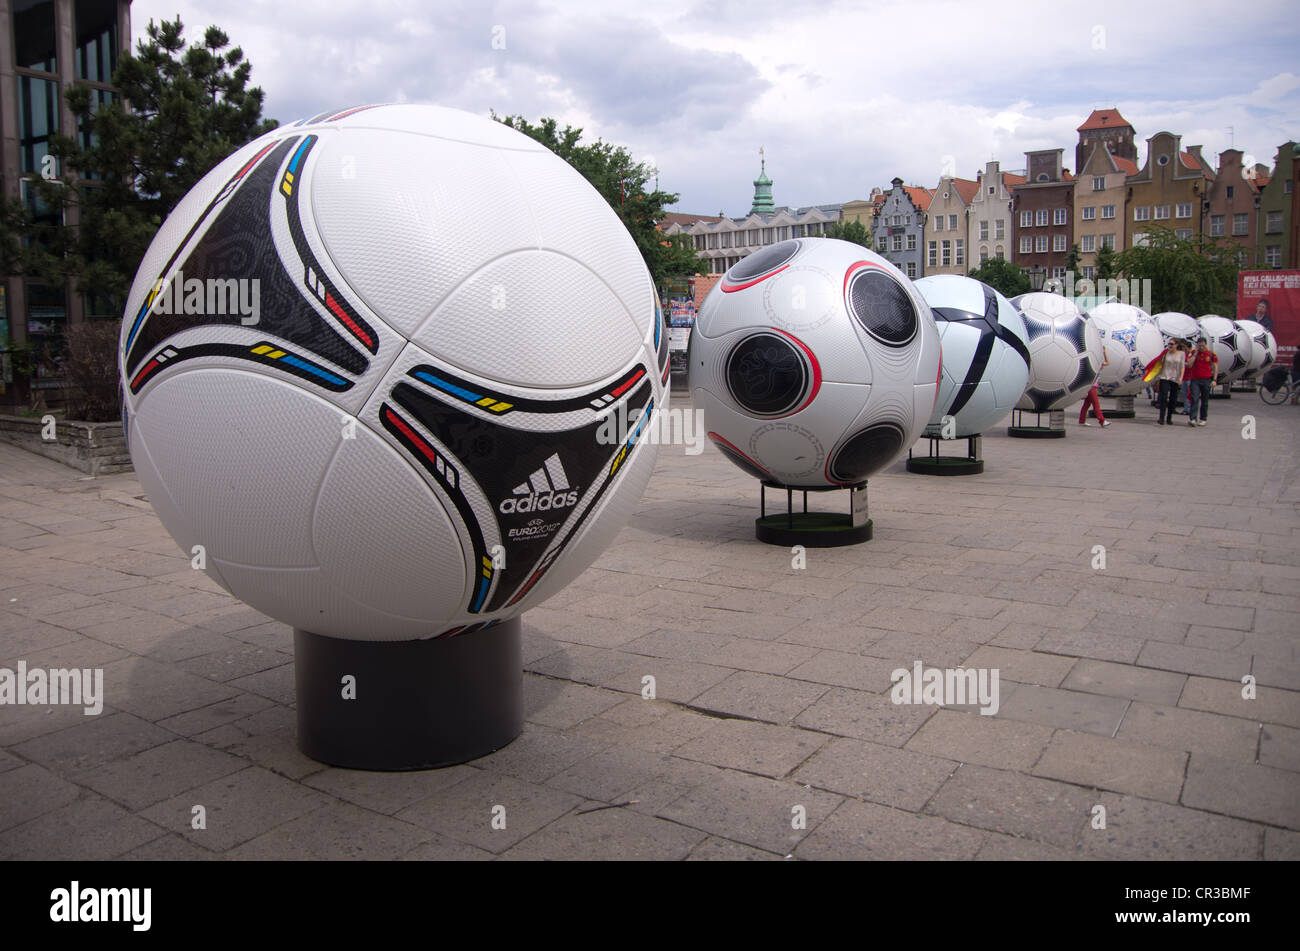 Giant reproduction the official balls made by Adidas for the editions of soccer, Gdansk,Poland Stock Photo - Alamy